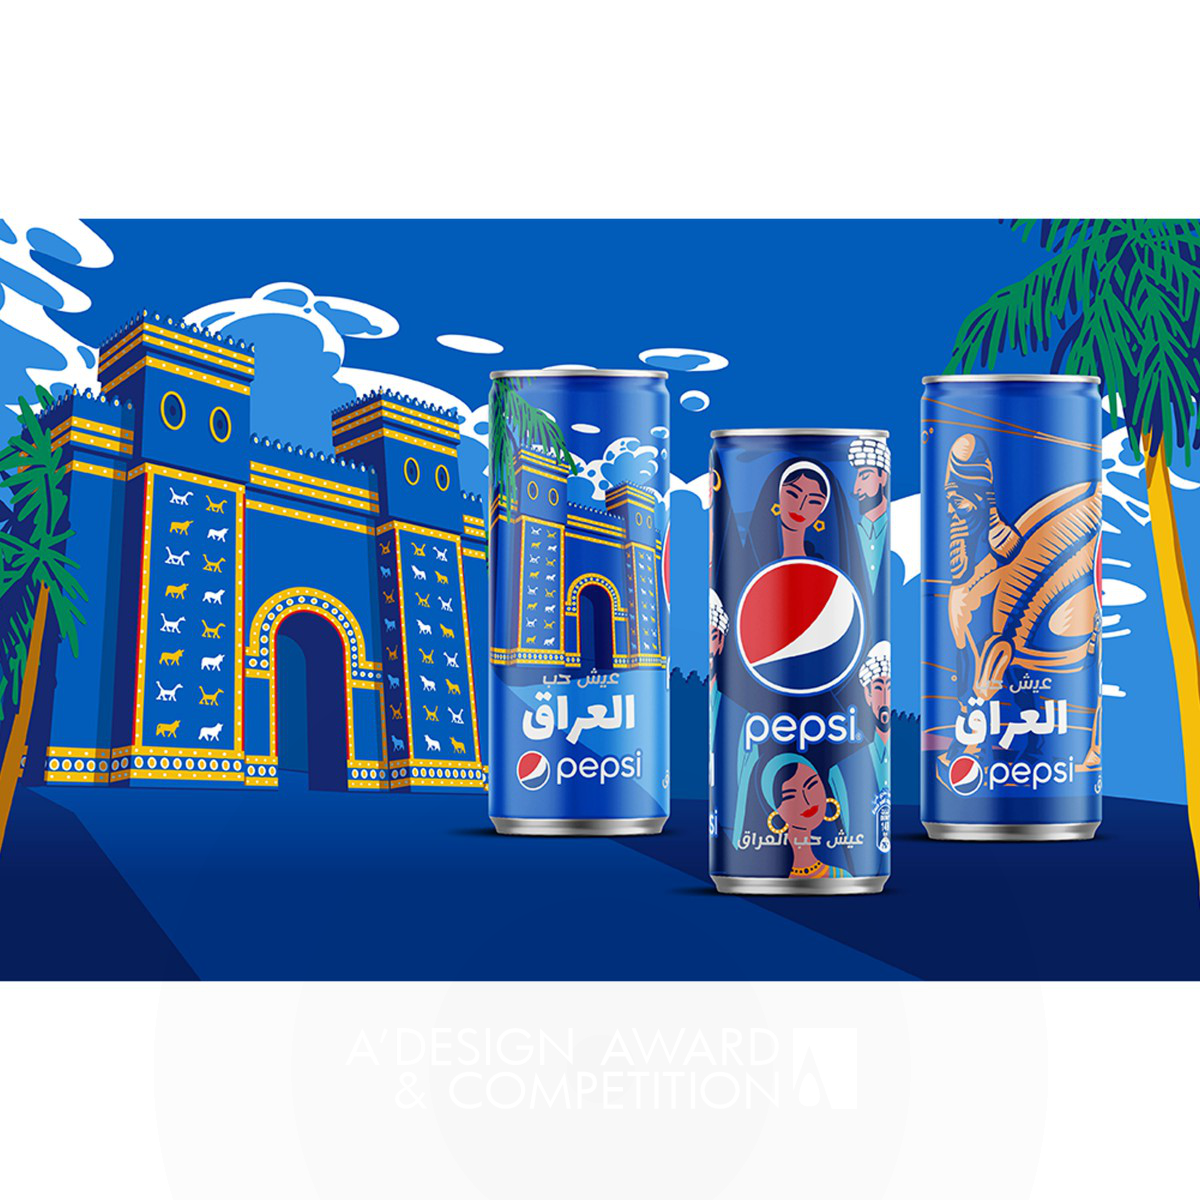 Pepsi Culture Can Series Beverage by PepsiCo Design and Innovation Golden Packaging Design Award Winner 2021 